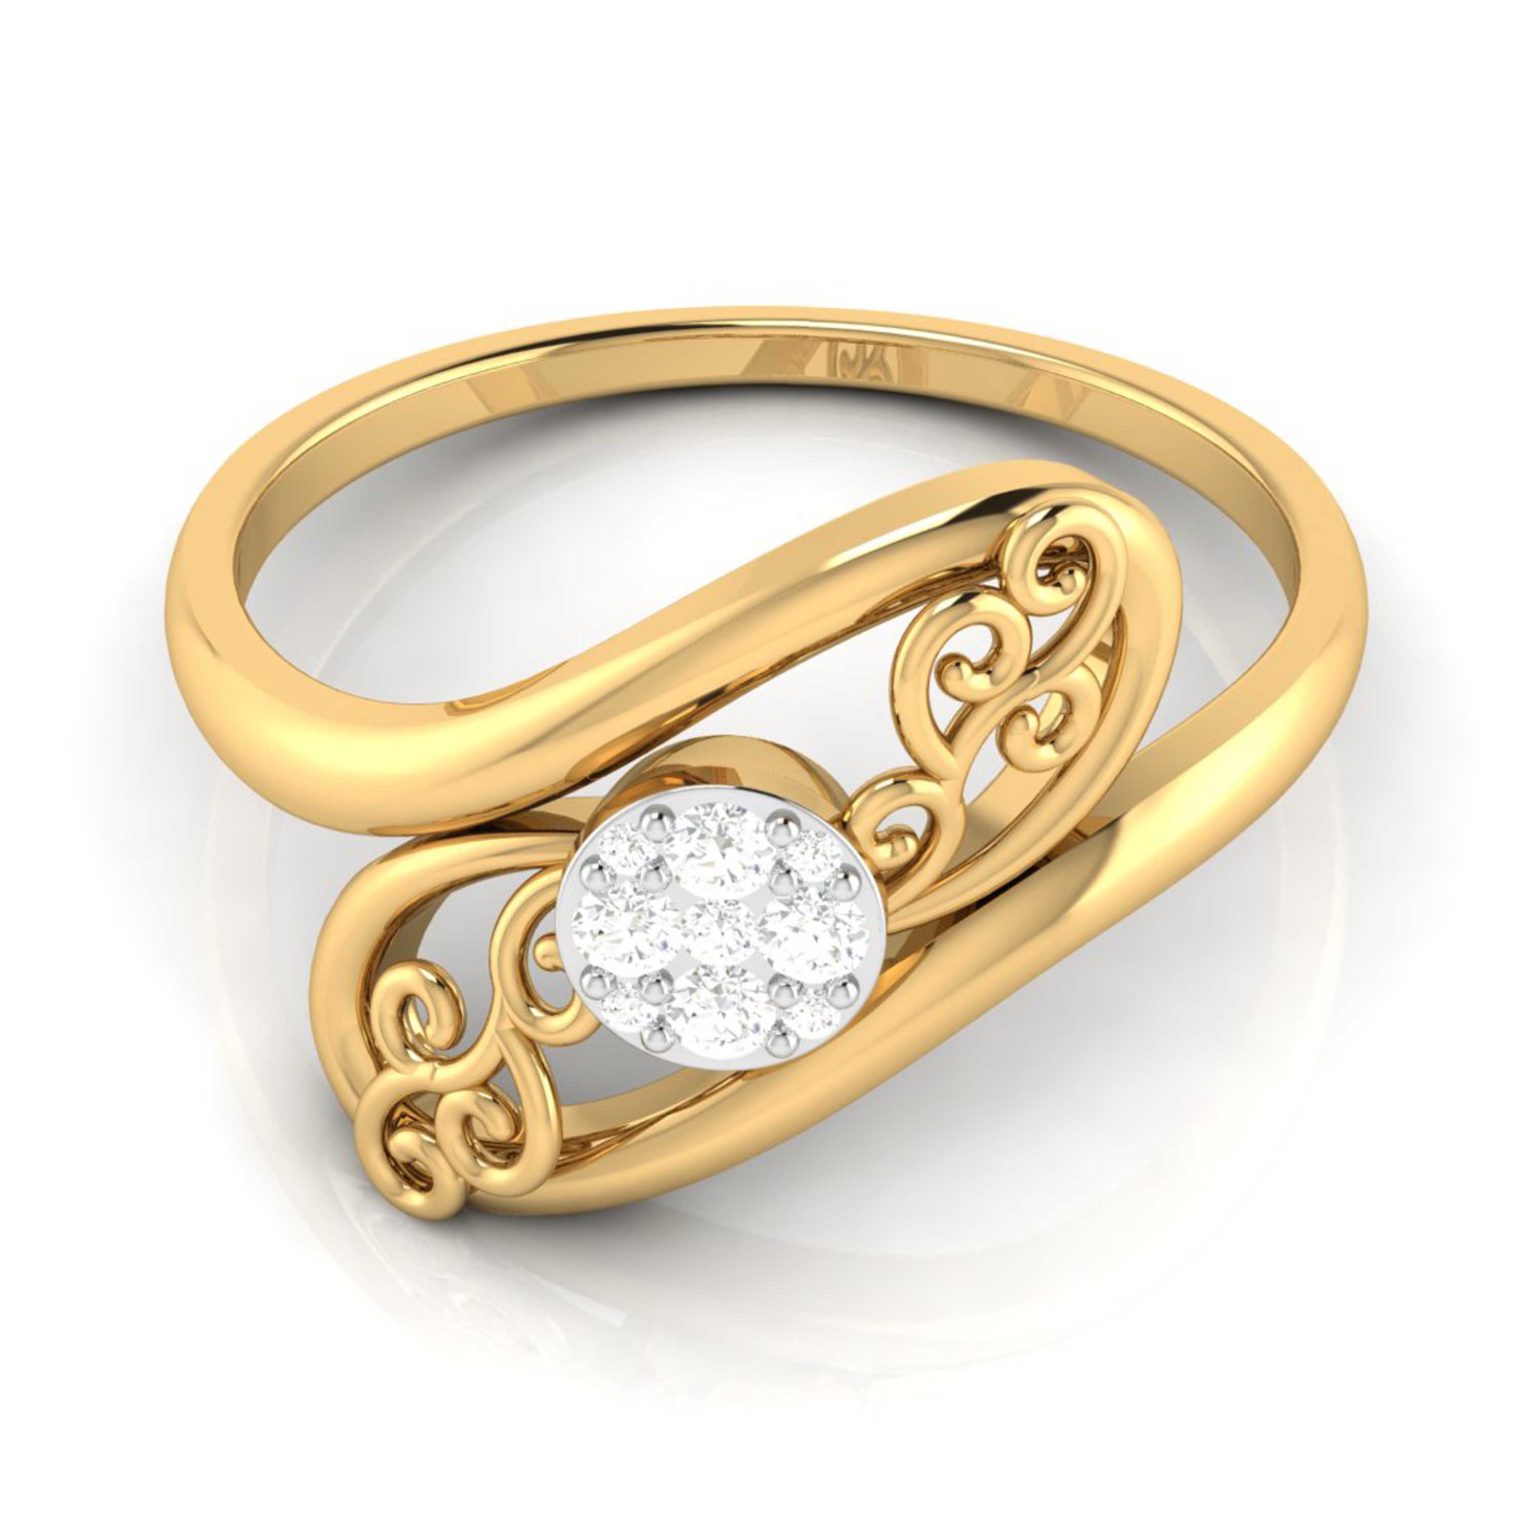 Wring Ring Collection – 18 KT – RMDG ADR – 1978